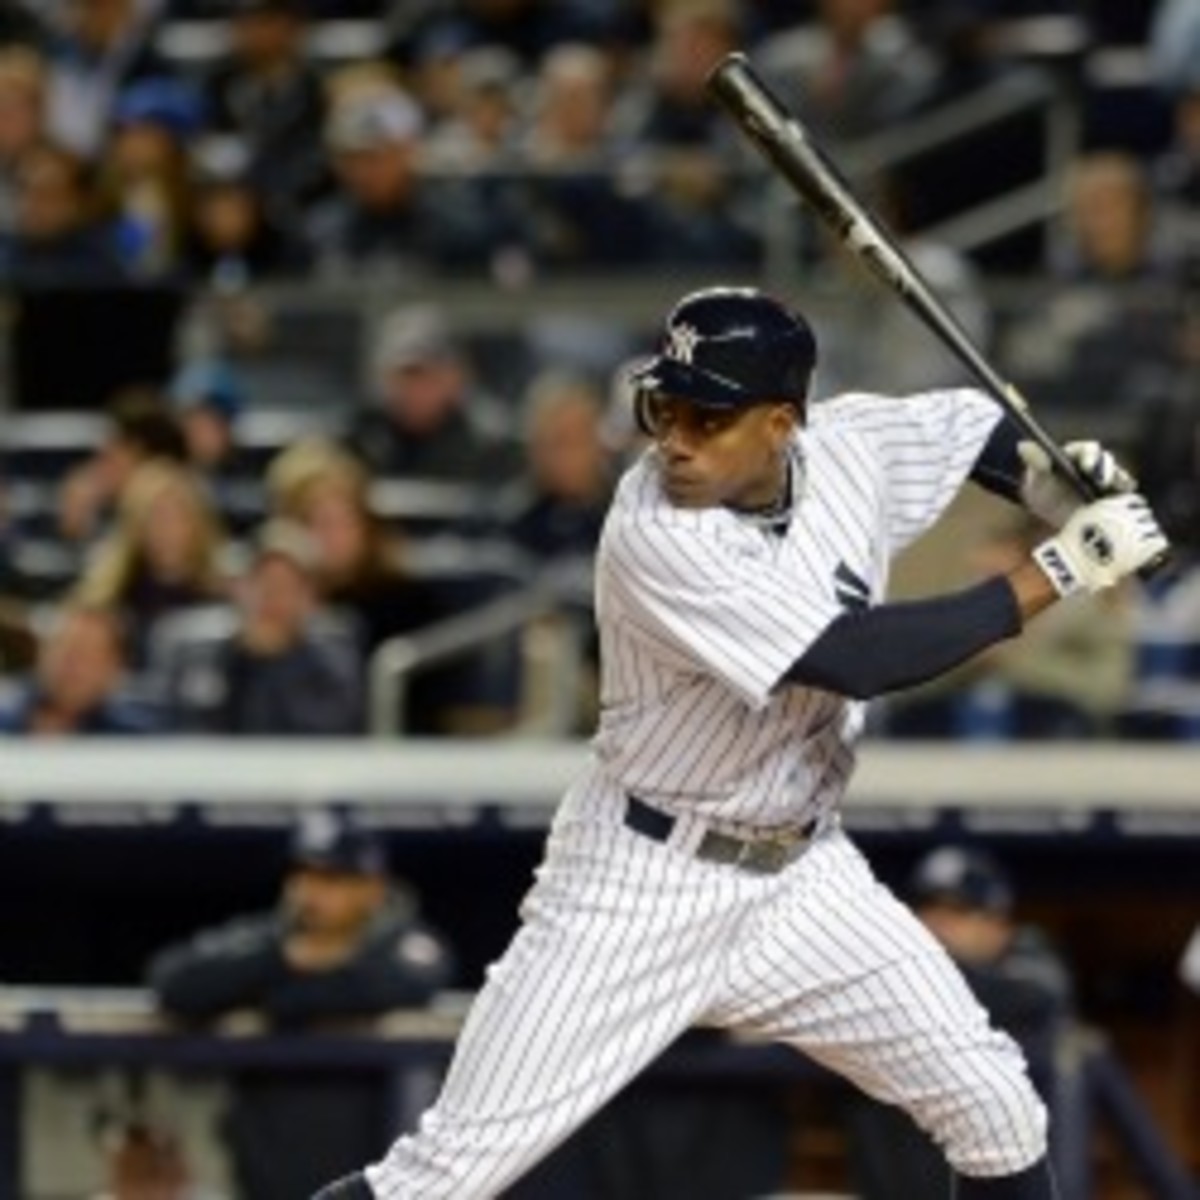 Yankees outfielder Curtis Granderson could be back on the field in a couple of weeks. (Mark Cunningham/Getty Images)